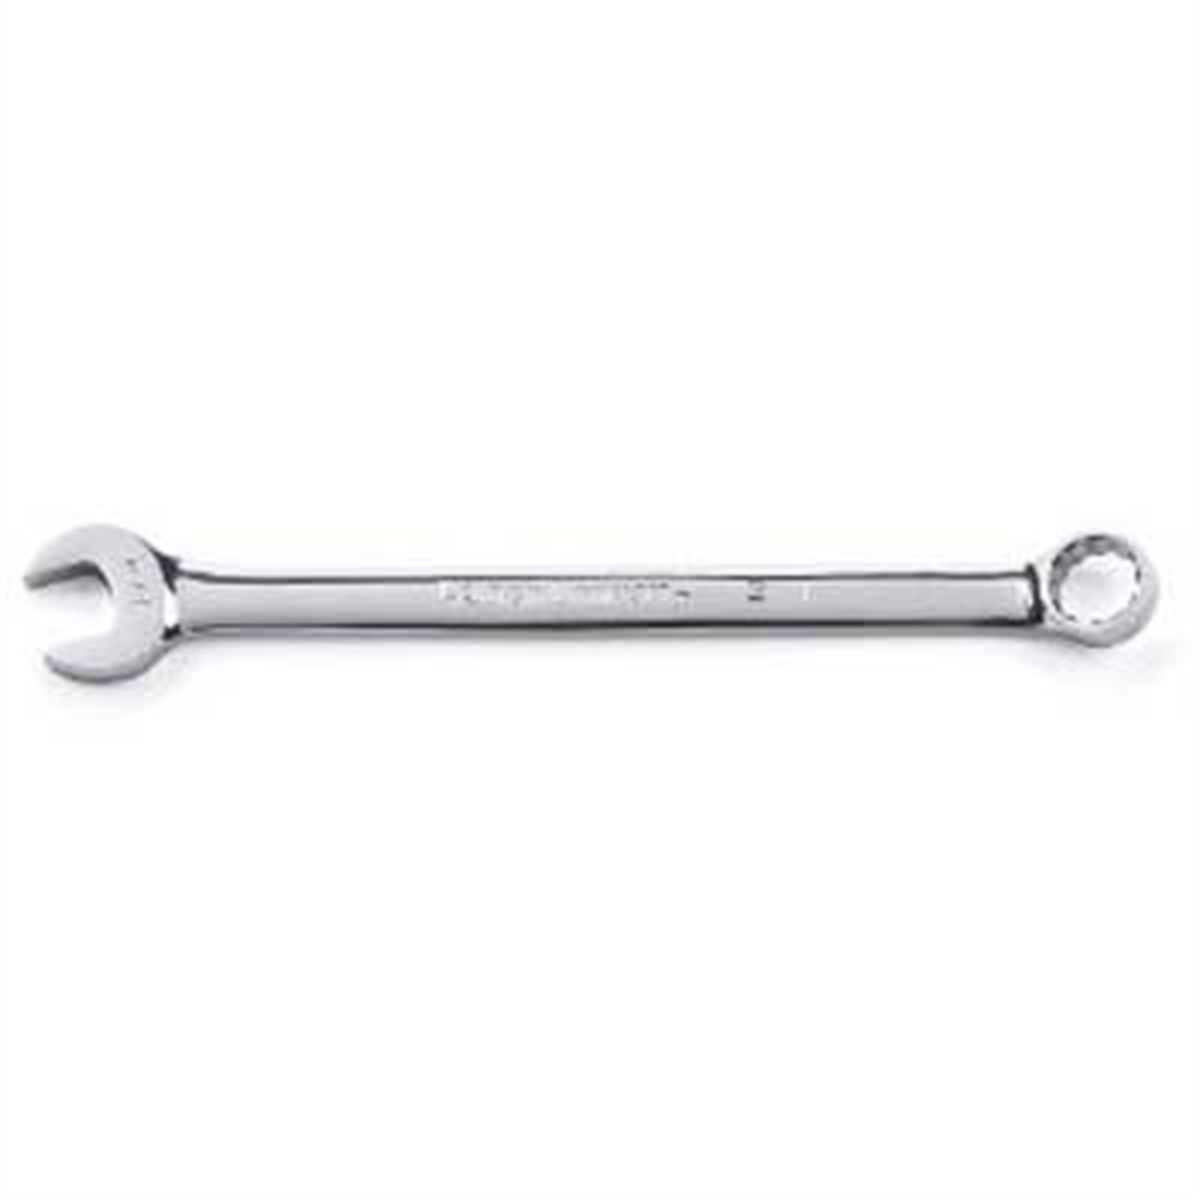 8 mm 12 Pt. Non-Ratcheting Combination Wrench